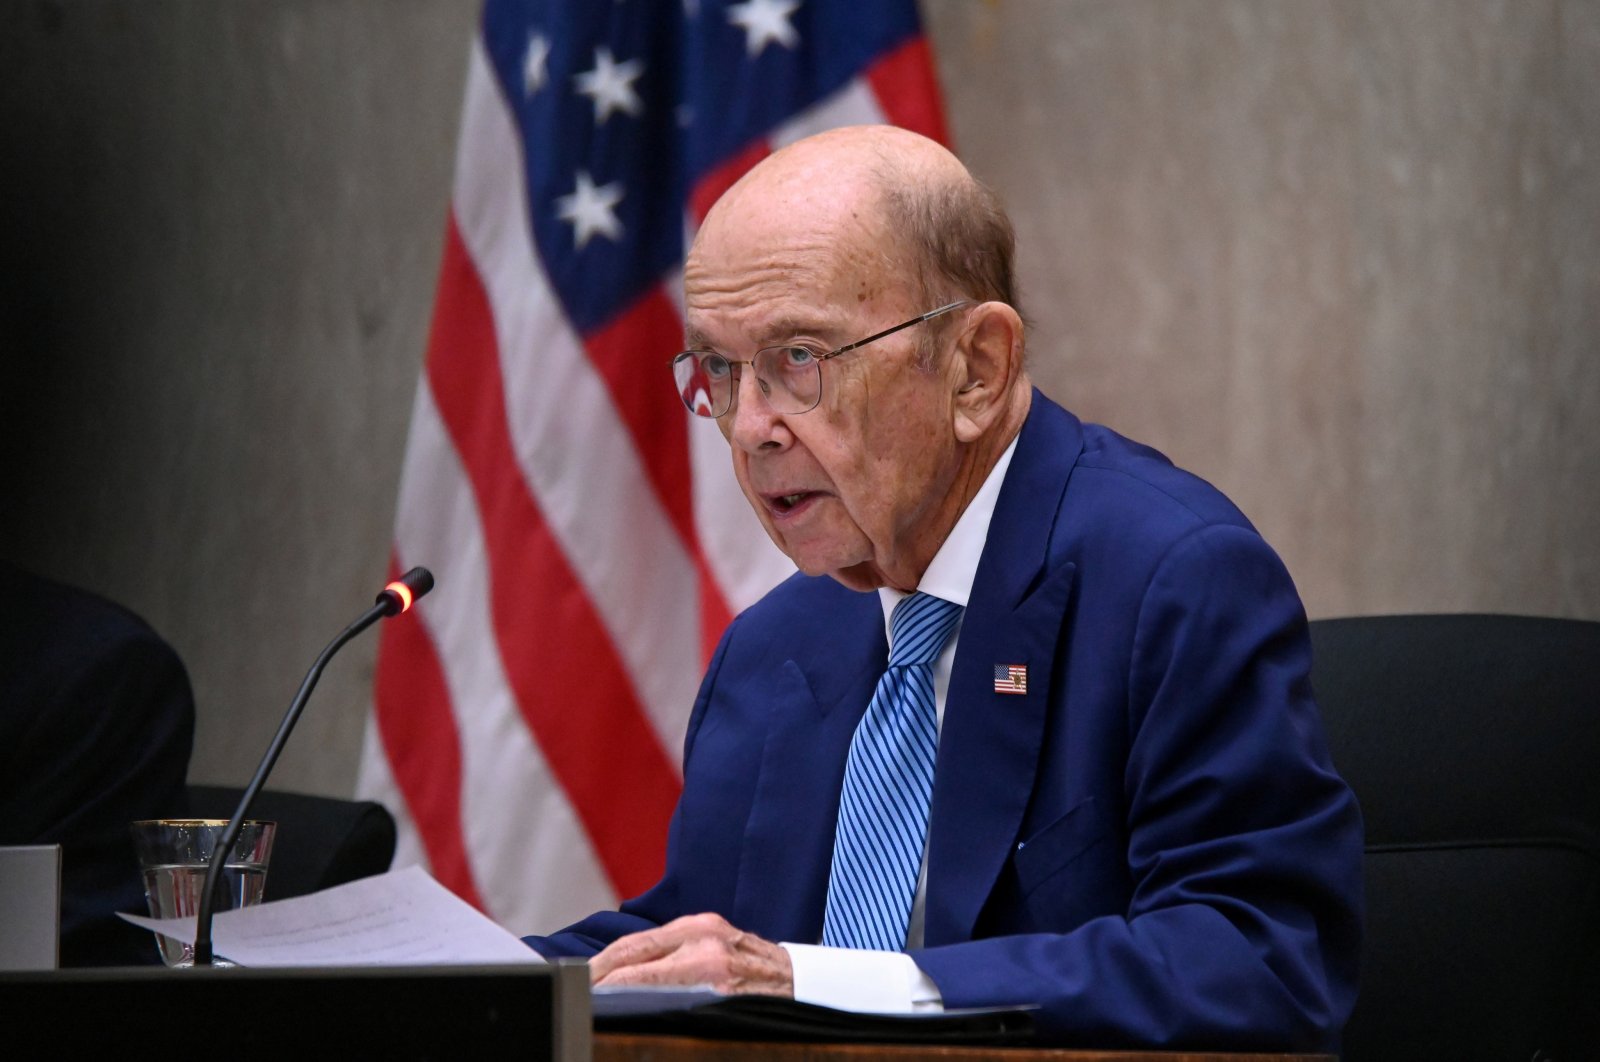 U.S. Commerce Secretary Wilbur Ross speaks during the third annual U.S.-Qatar Strategic Dialogue at the State Department in Washington, Sept. 14, 2020. (Reuters Photo)